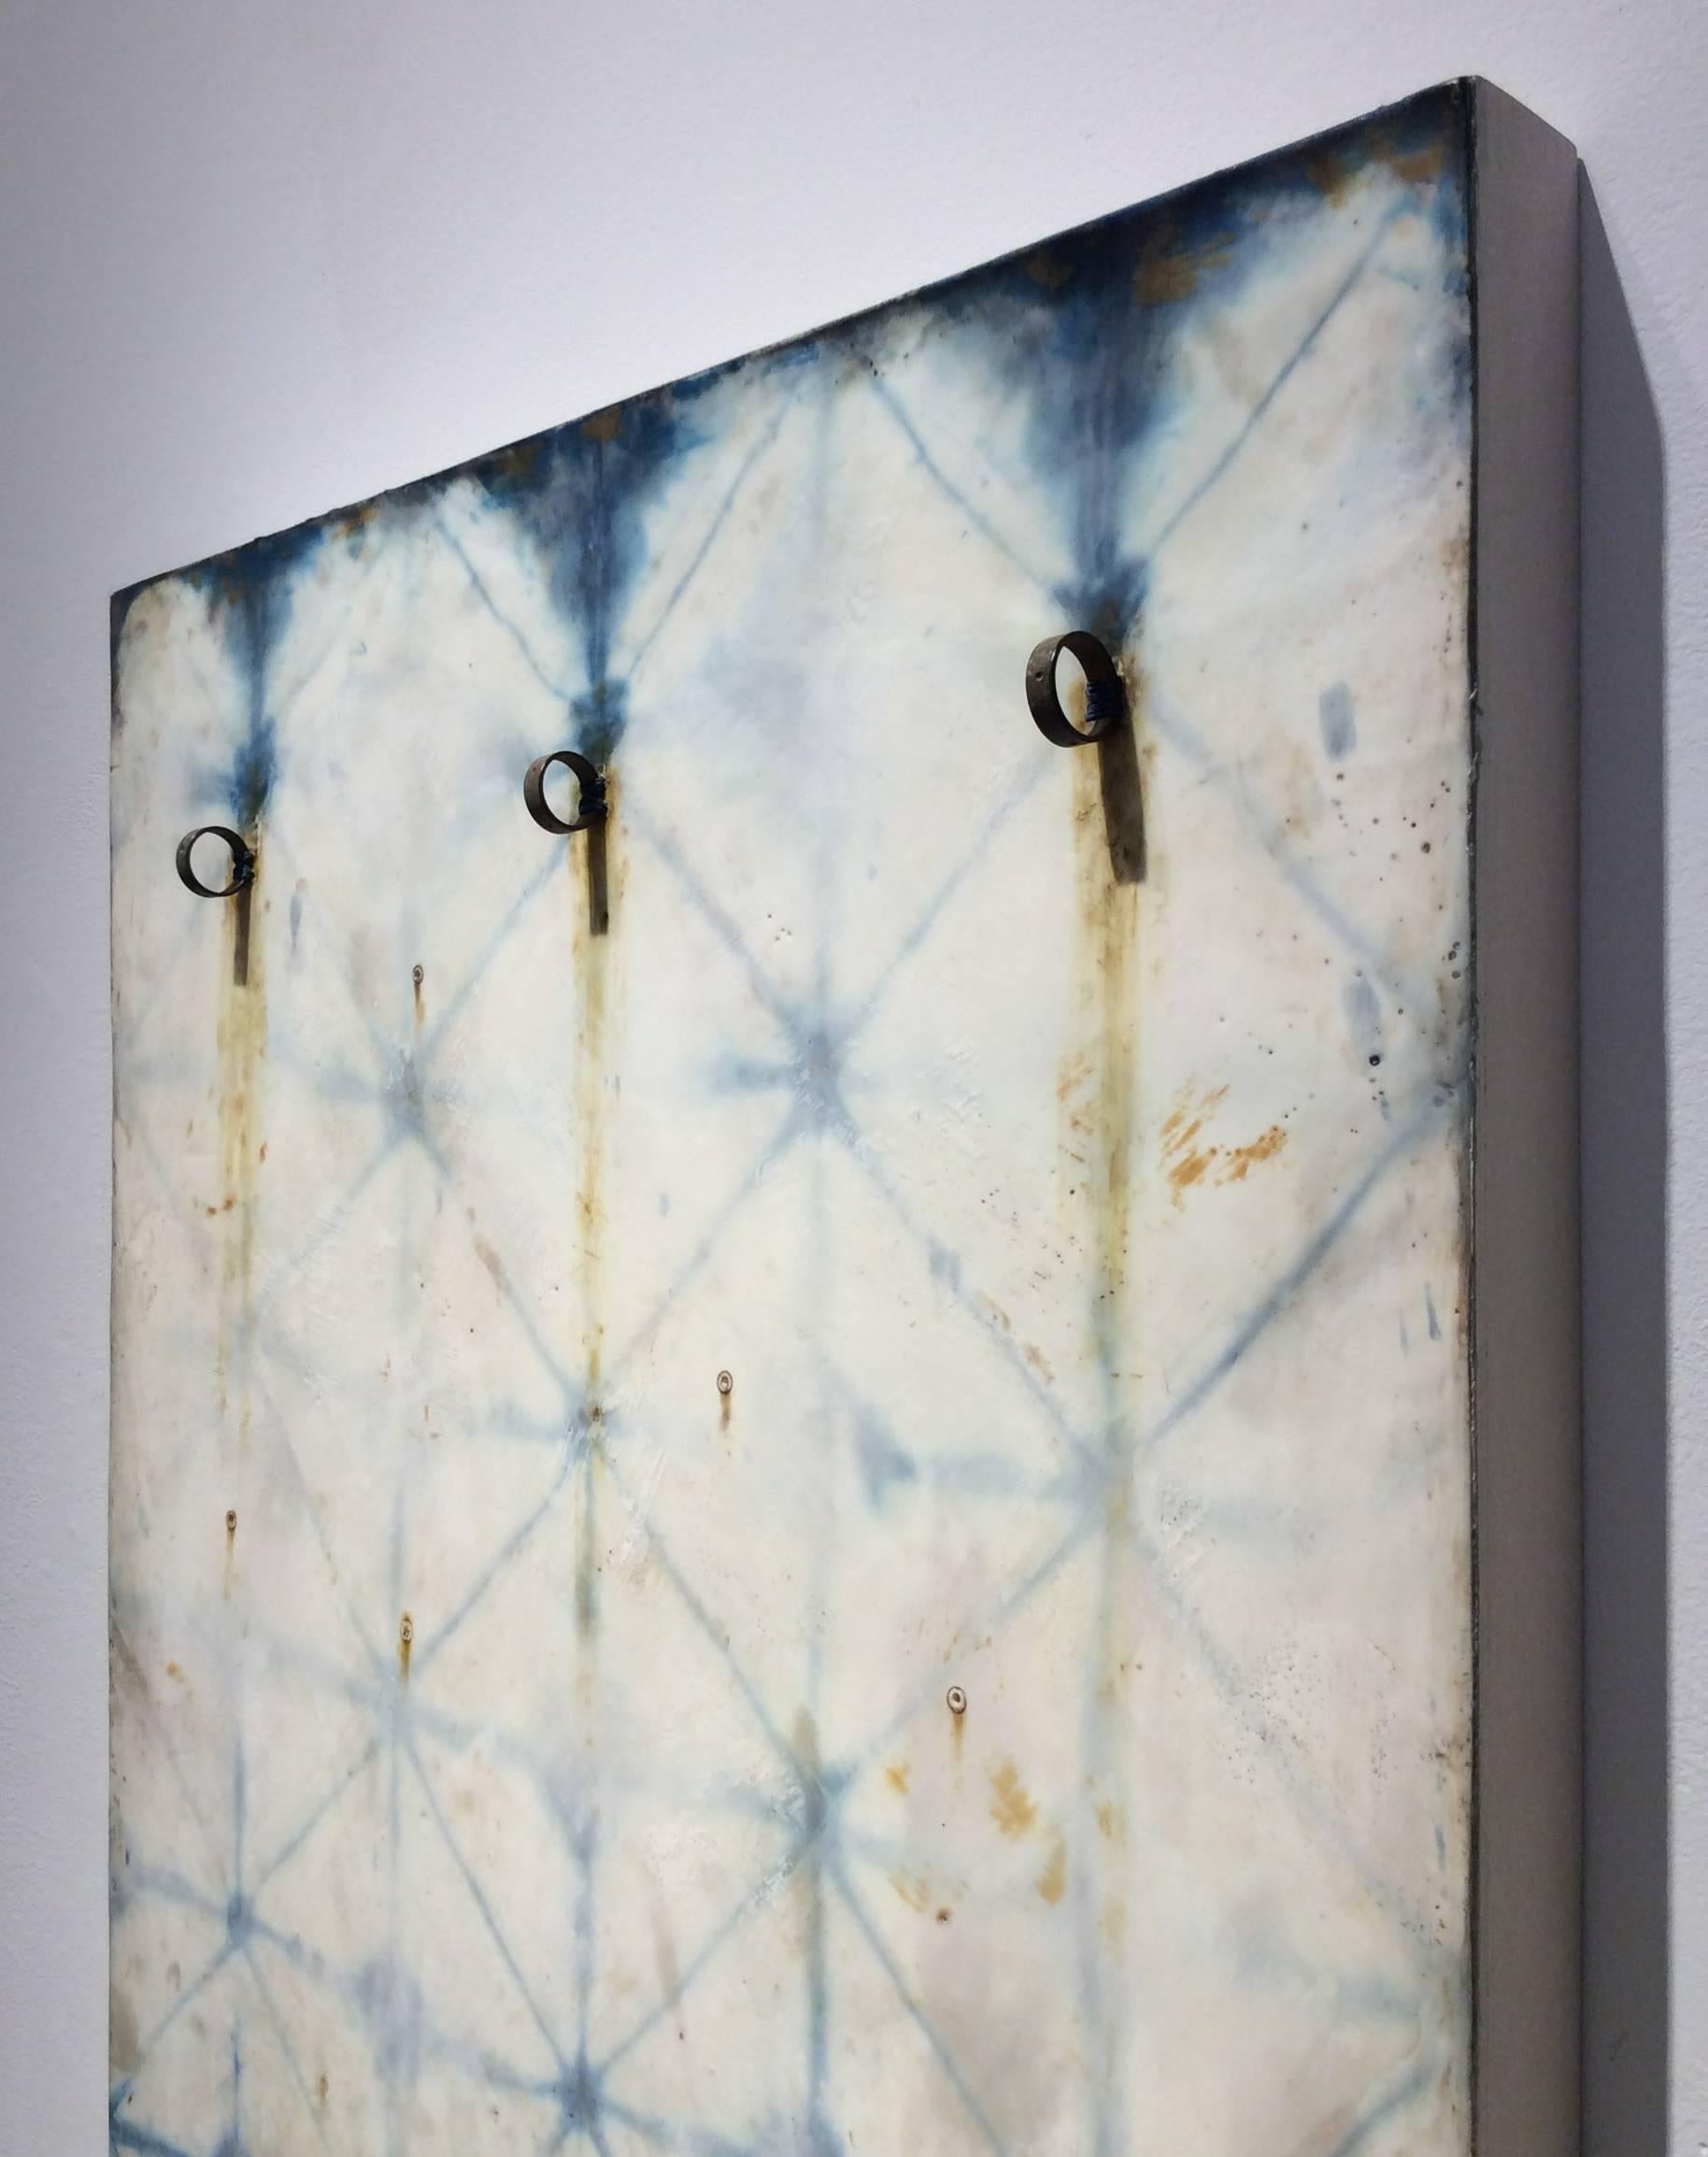 Hand dyed indigo silk, encaustic, and found objects on wood panel
36 x 18 x 2.5 inches

This vertical contemporary pattern-based abstract silk and encaustic work on panel was created by San Francisco-based artist Susan Stover as part of her Indigo